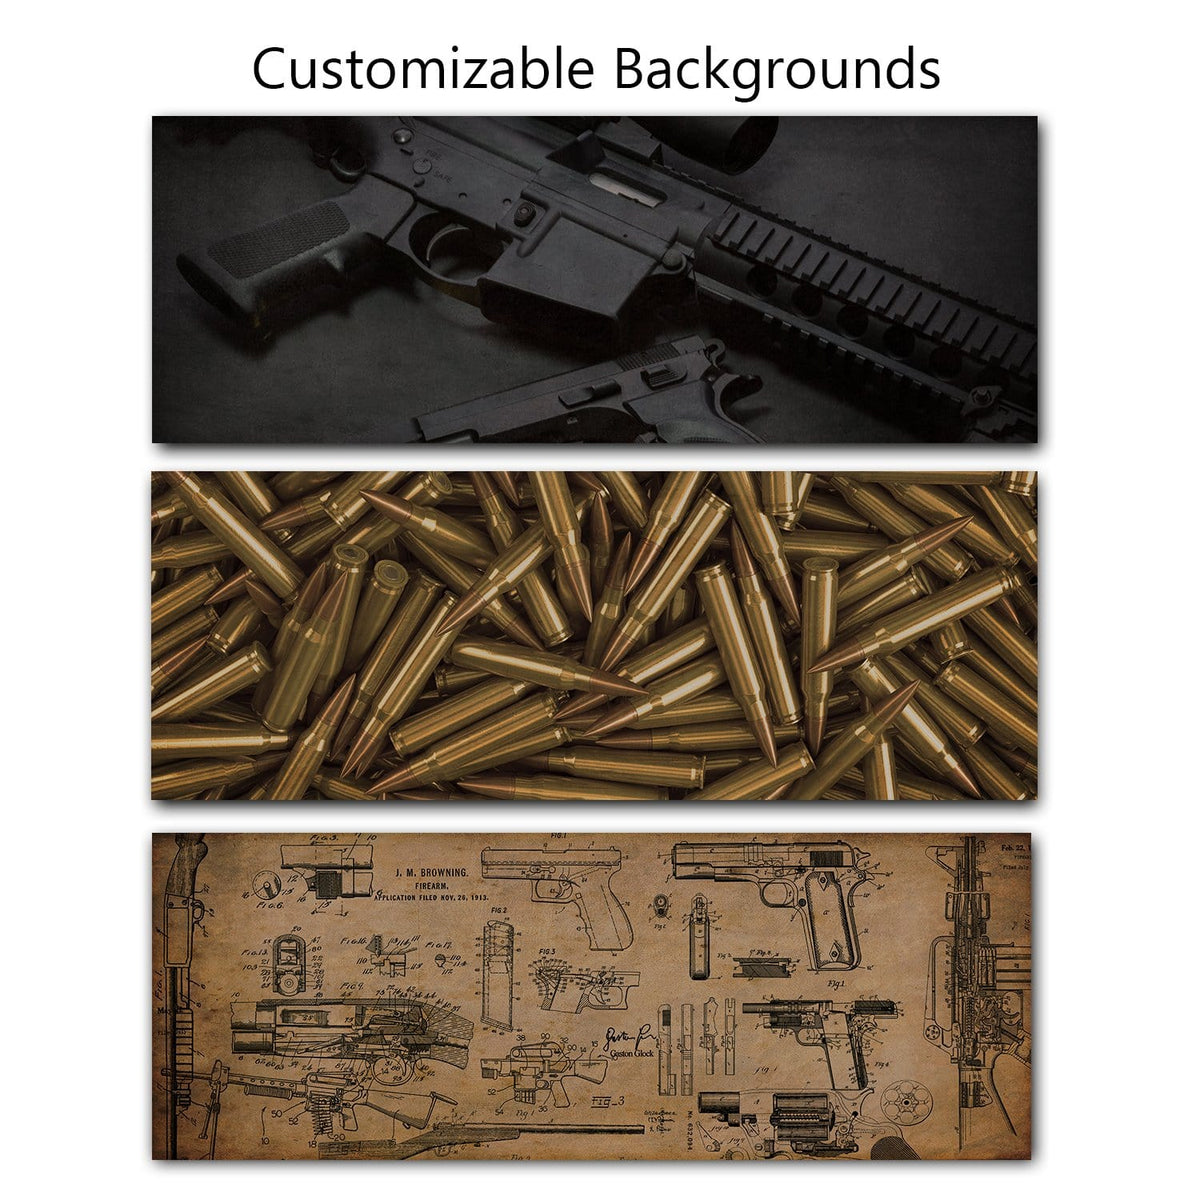 Select from multiple gun background options to fit your decor style